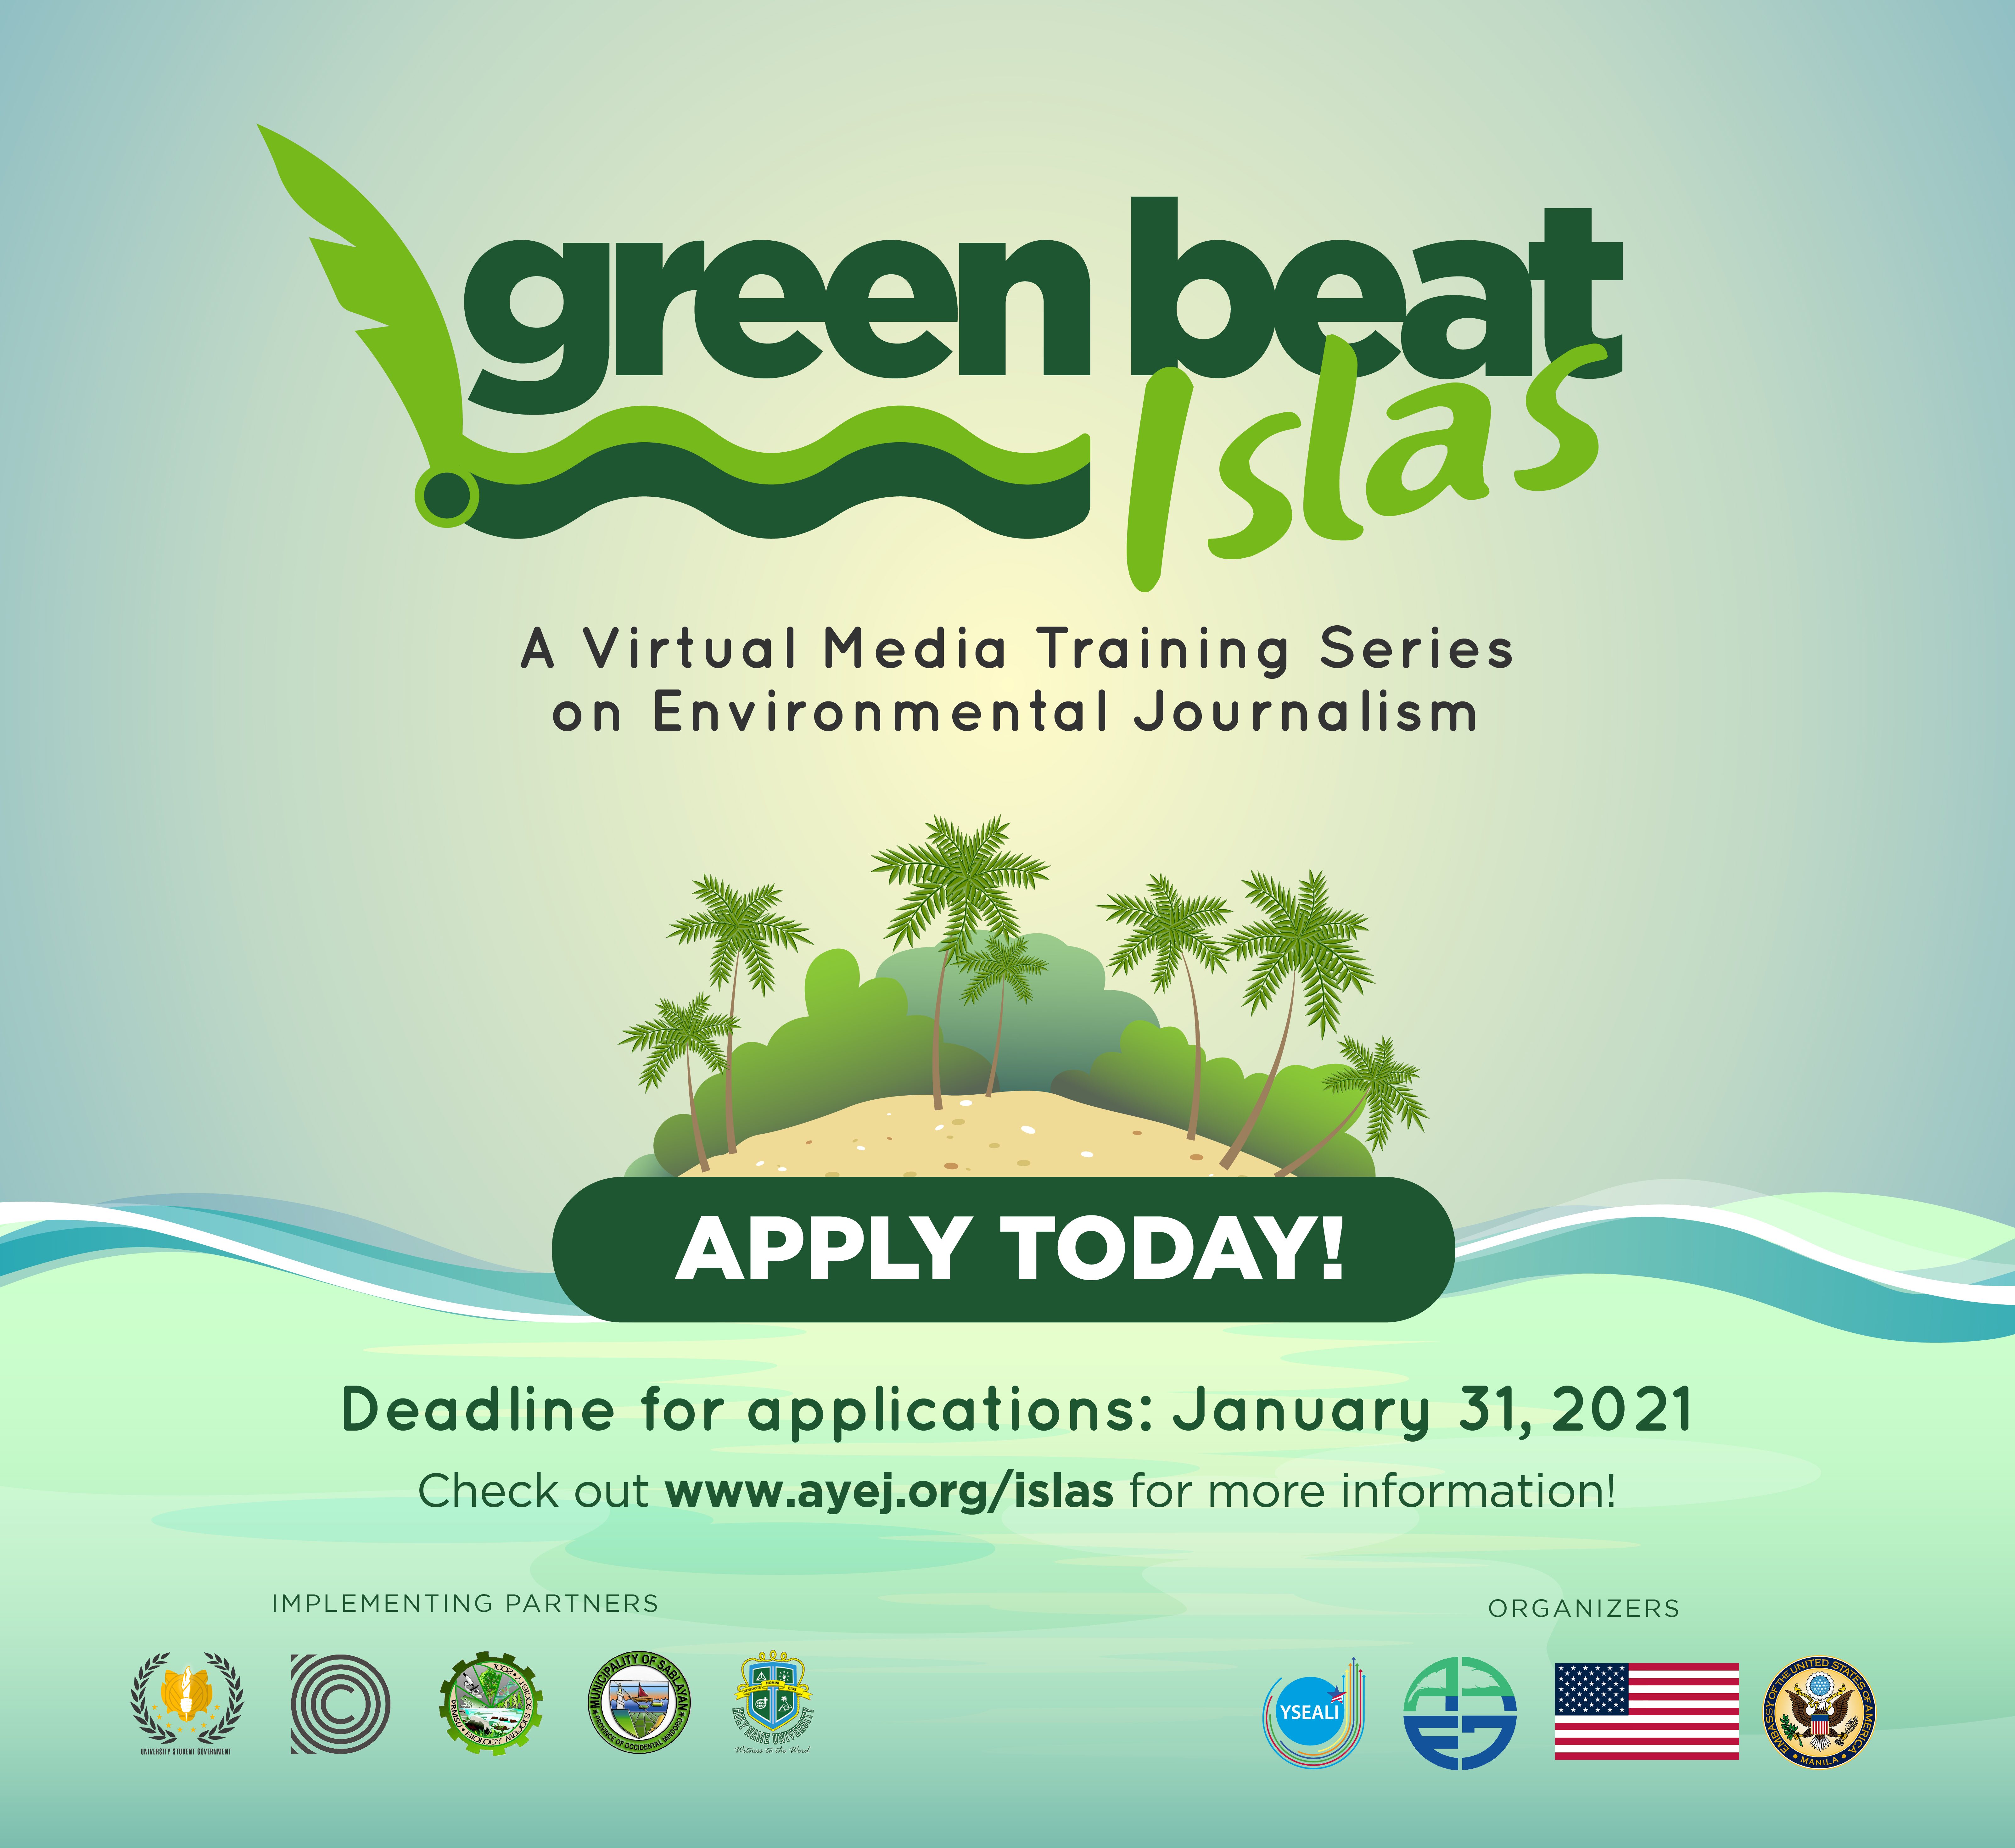 Online environmental journalism training launched for young writers across 5 PH cities